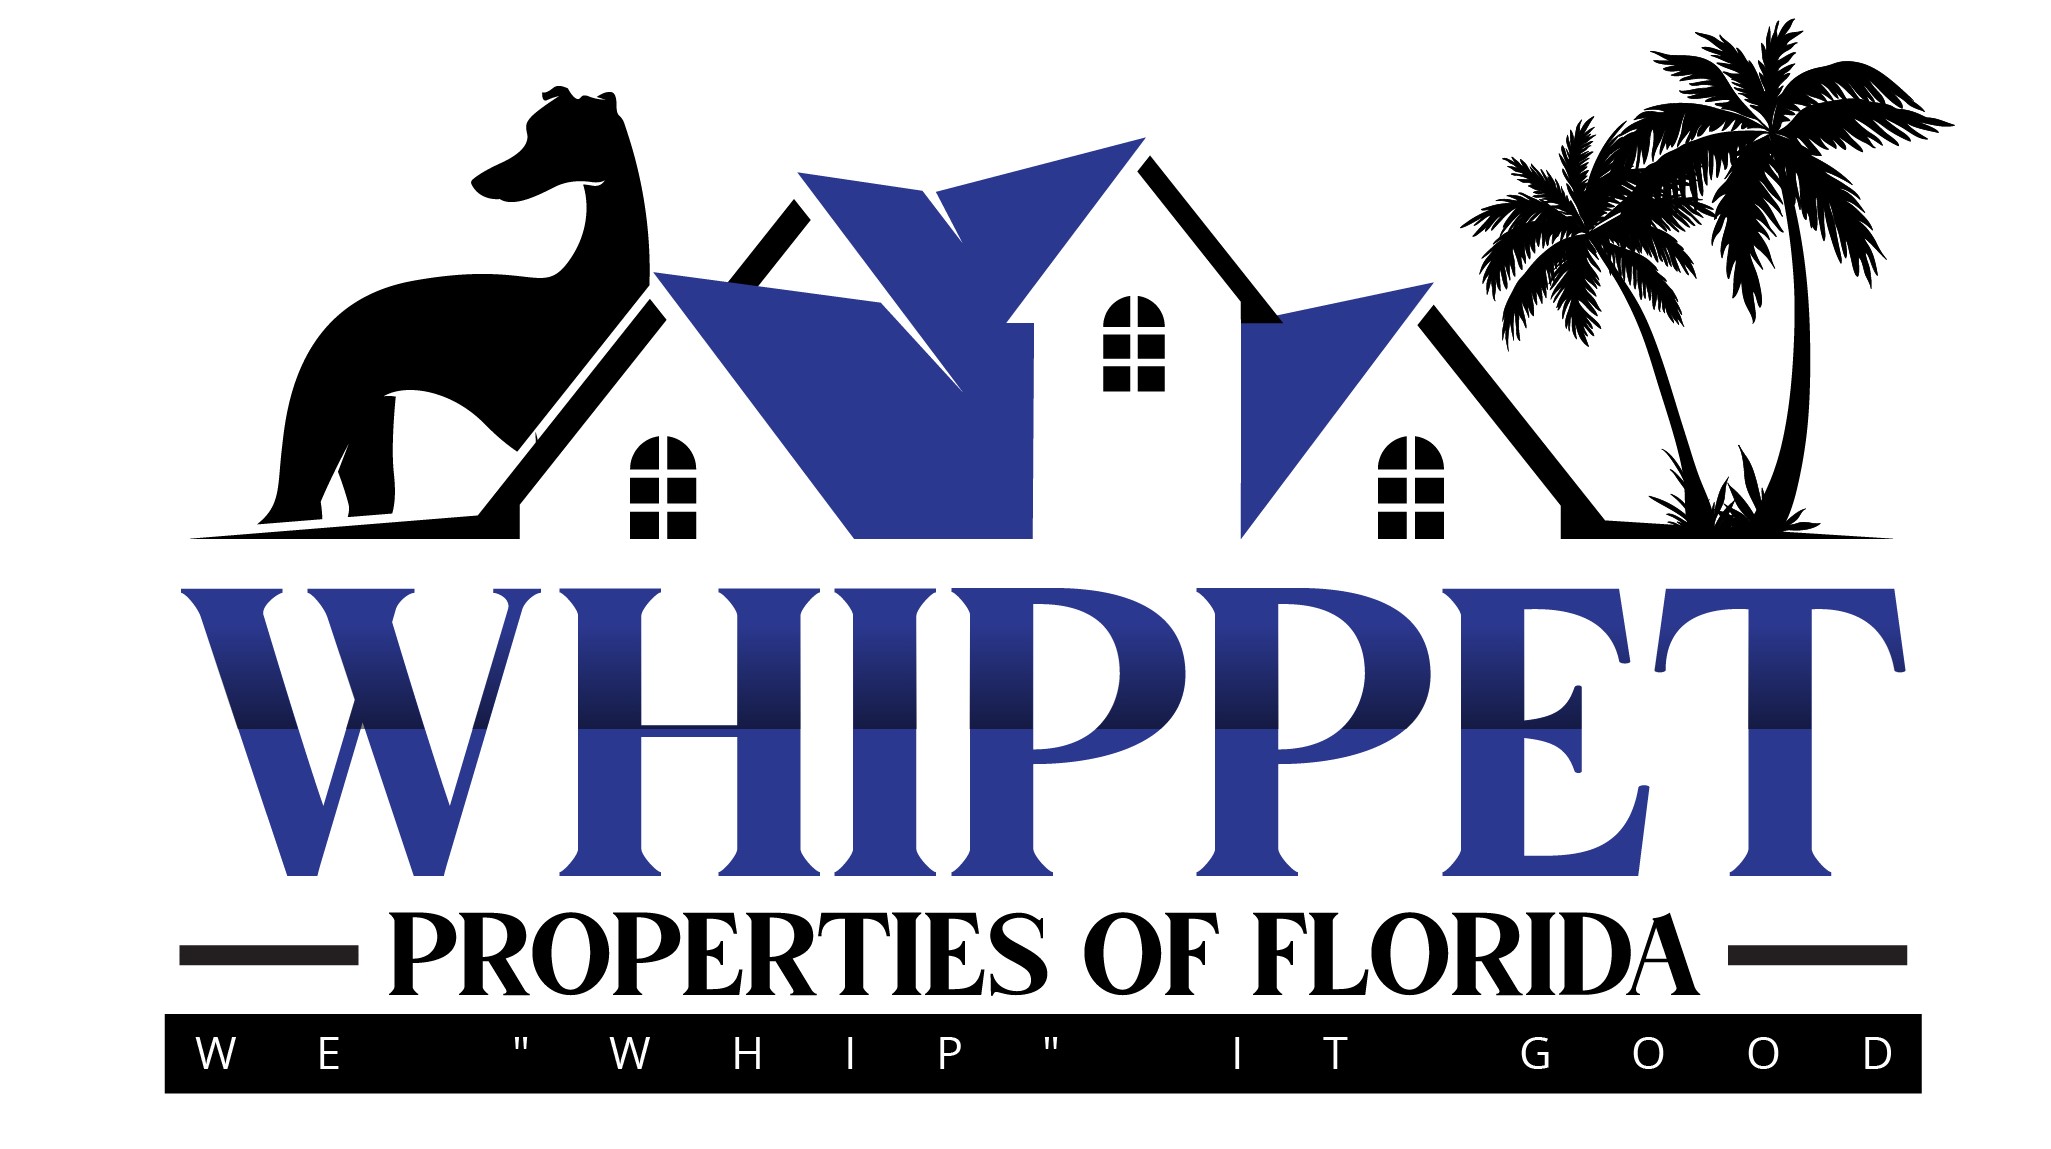 Gain an advantage when negotiating new construction in Tampa with Whippet Properties of Florida as your agent - 4074913816